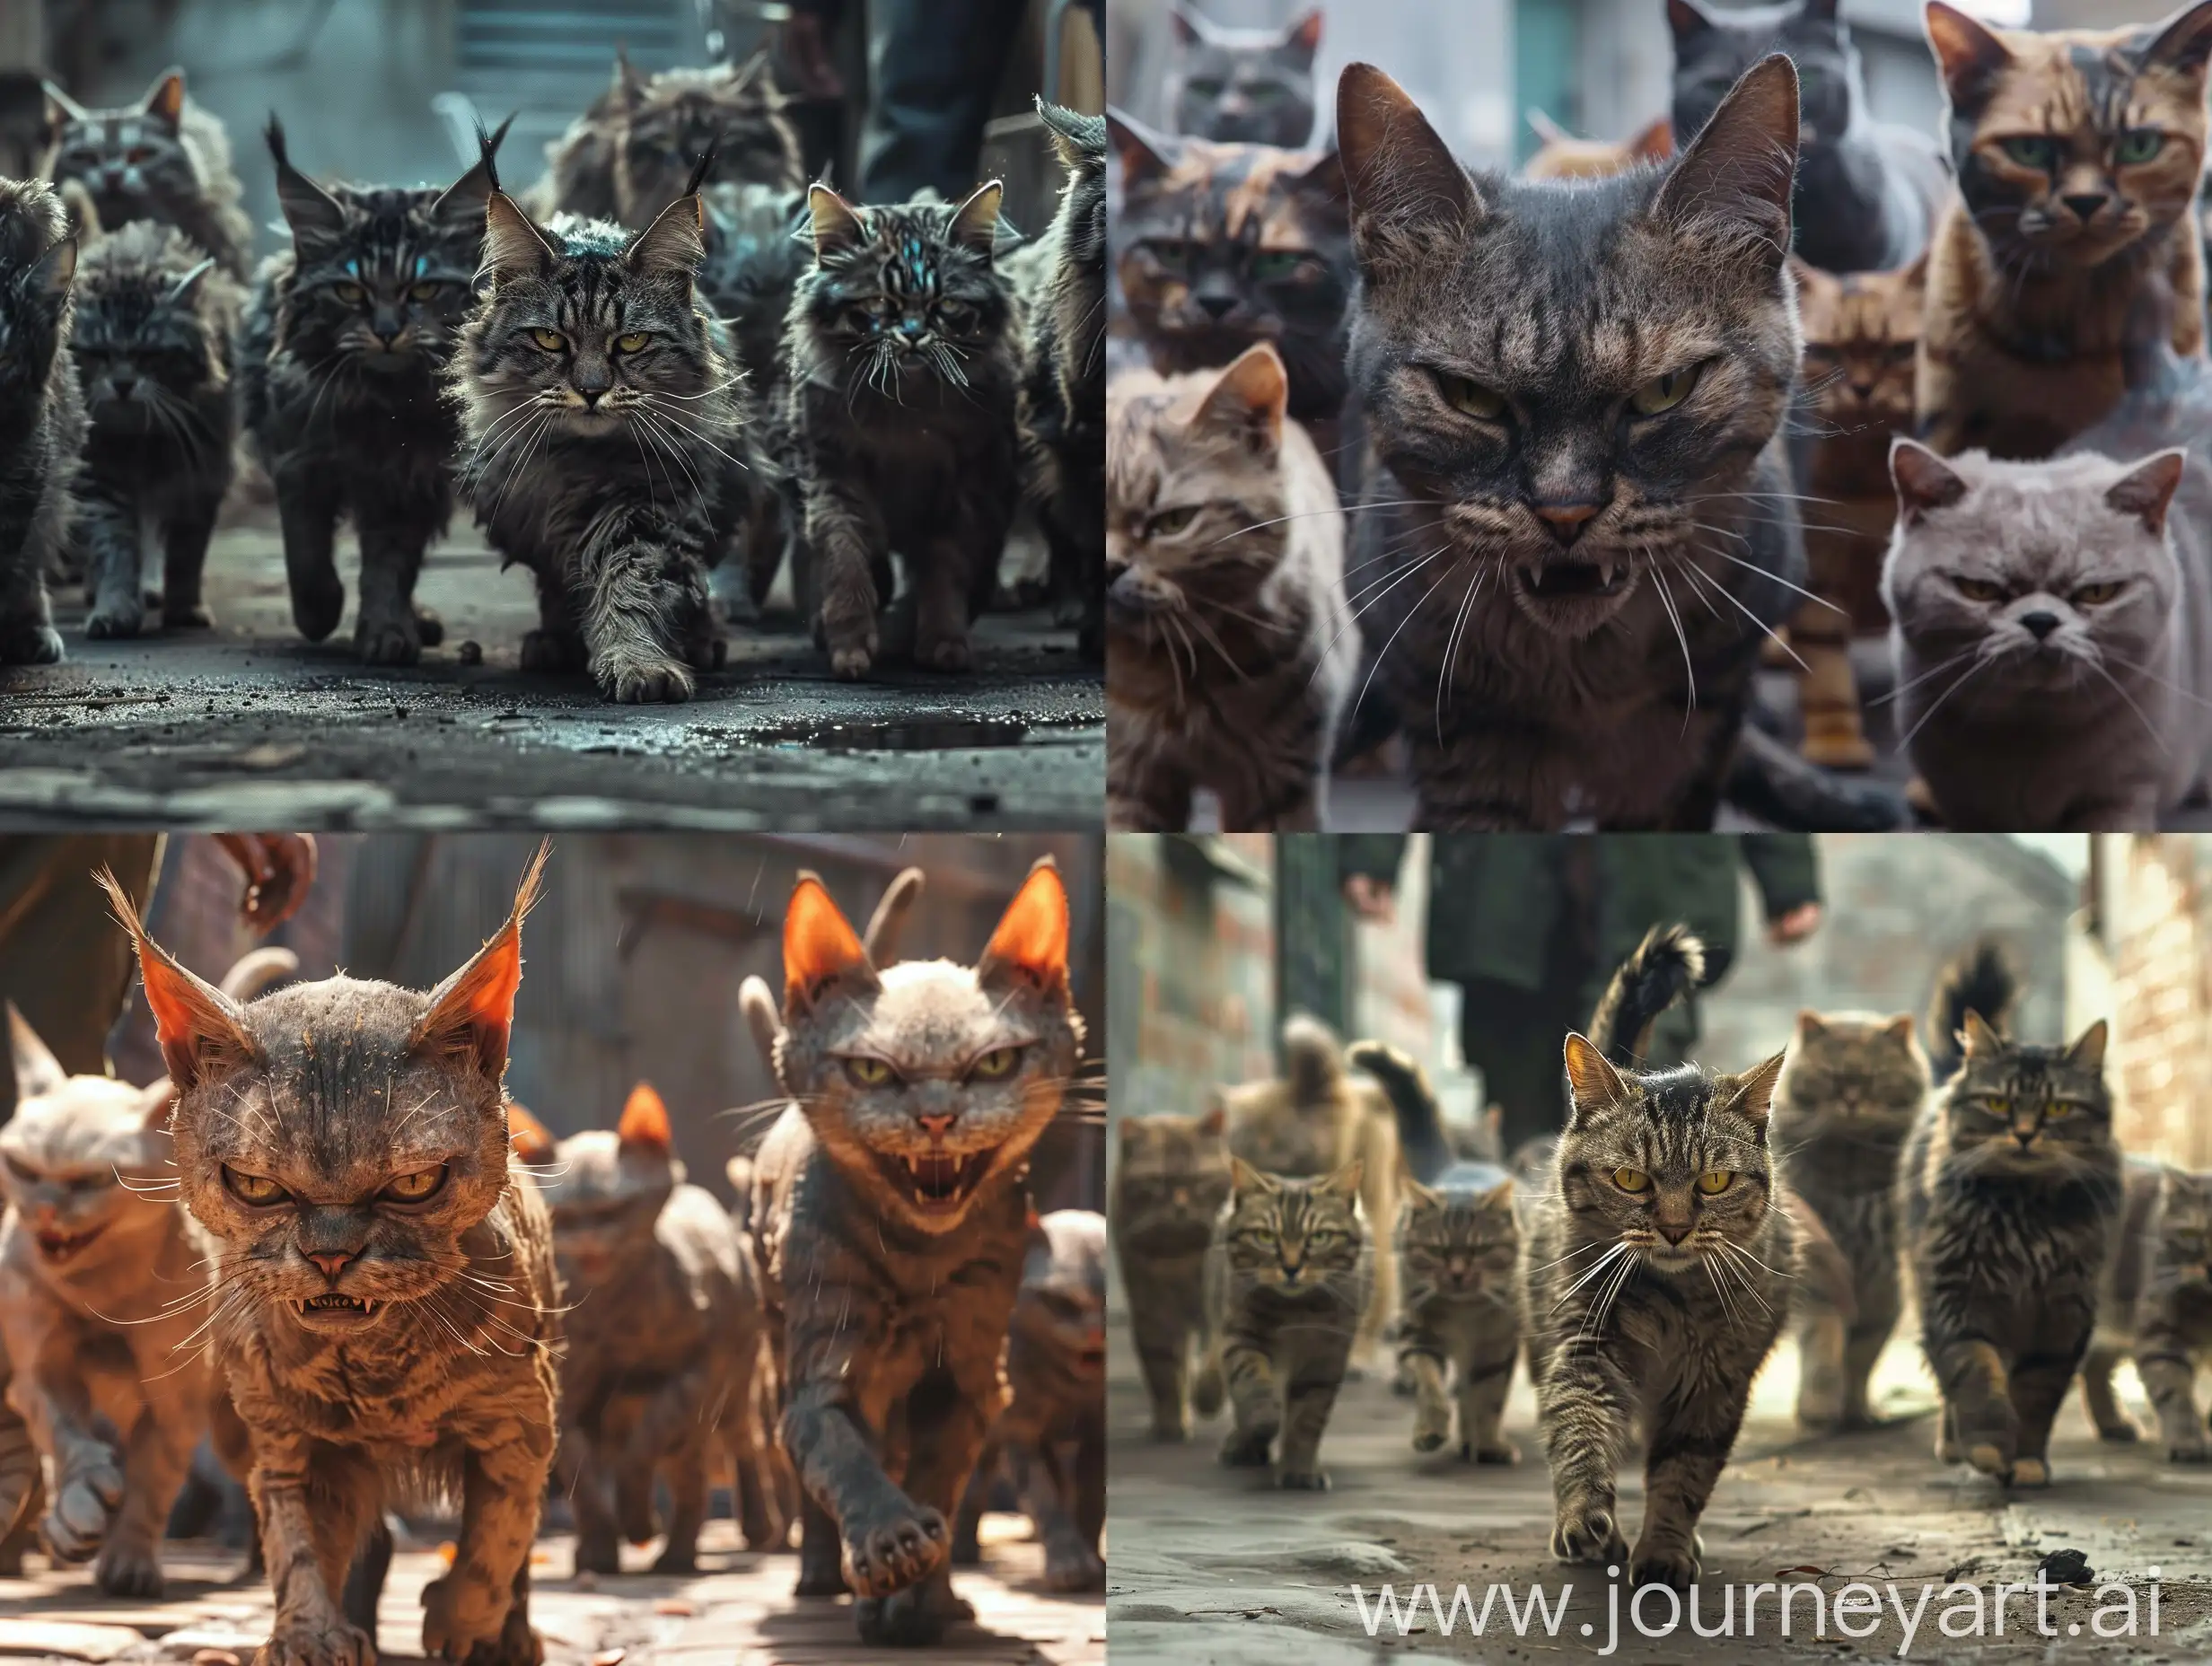 A gang of cats with ugly, threatening faces, coming towards someone. uLTRA REALIST 8K